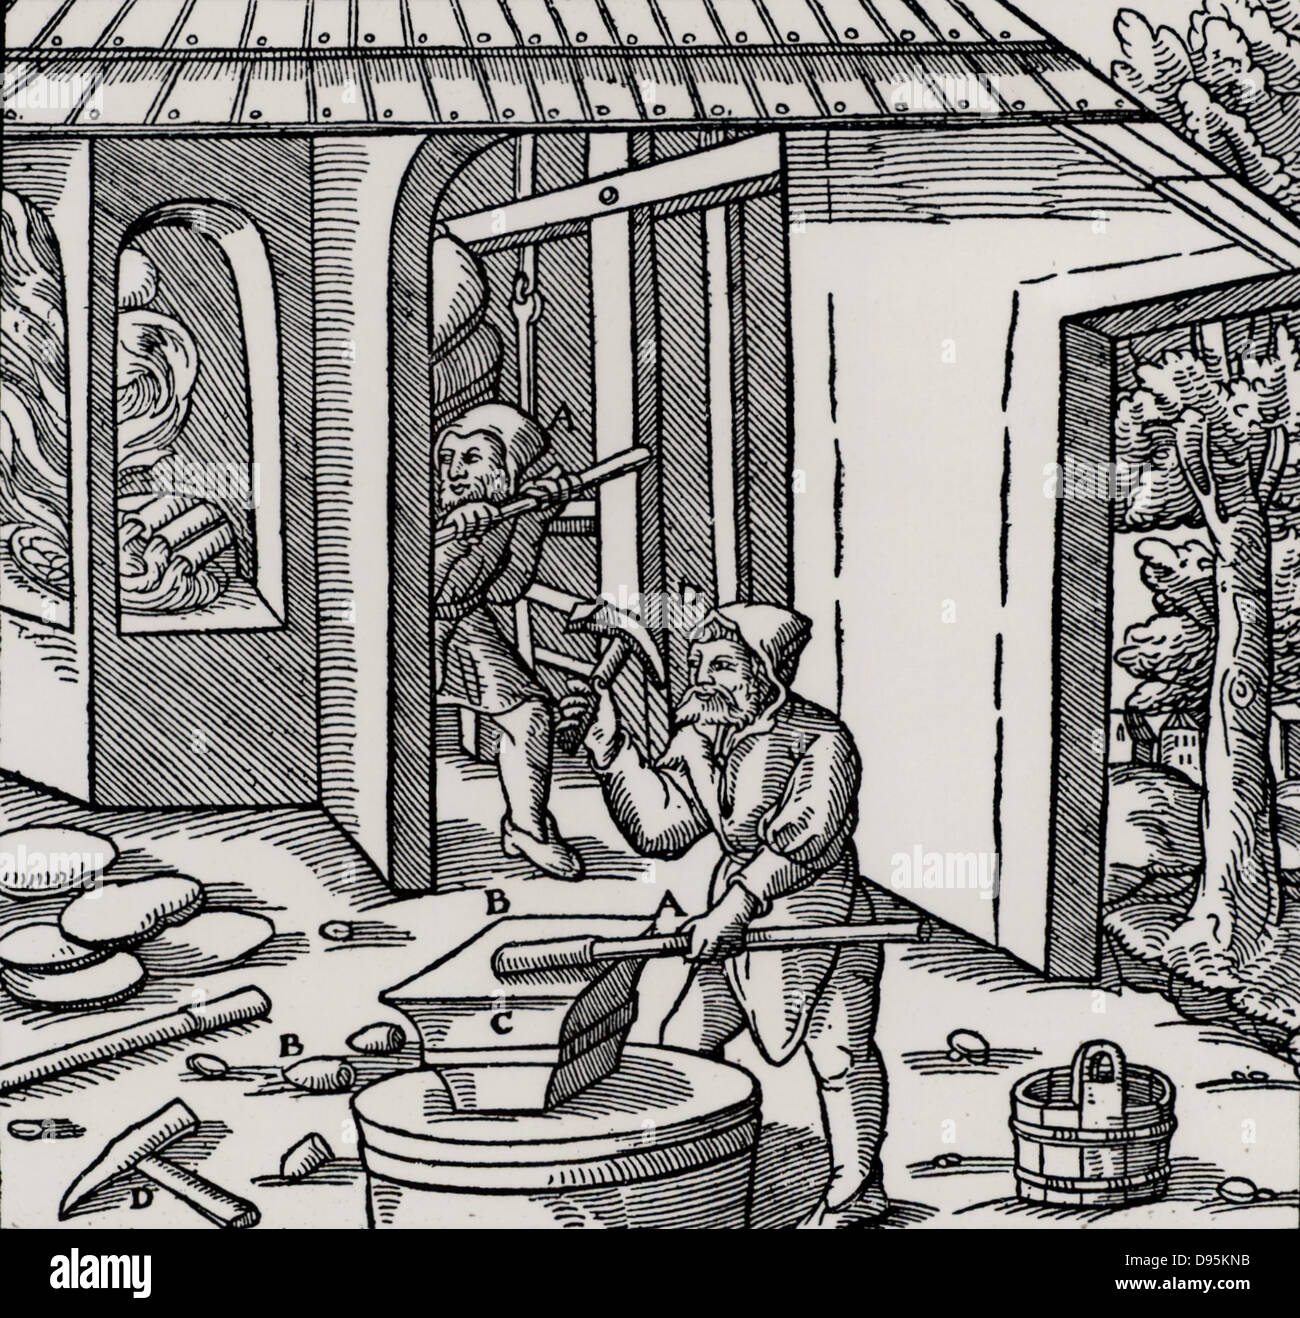 Refining copper in a furnace.  In the foreground a coating of copper is being hammered off an iron bar.  This was a method of testing to see if the metal was sufficiently refined. From 'De re metallica', by Agricola, pseudonym of Georg Bauer (Basle, 1556) Stock Photo